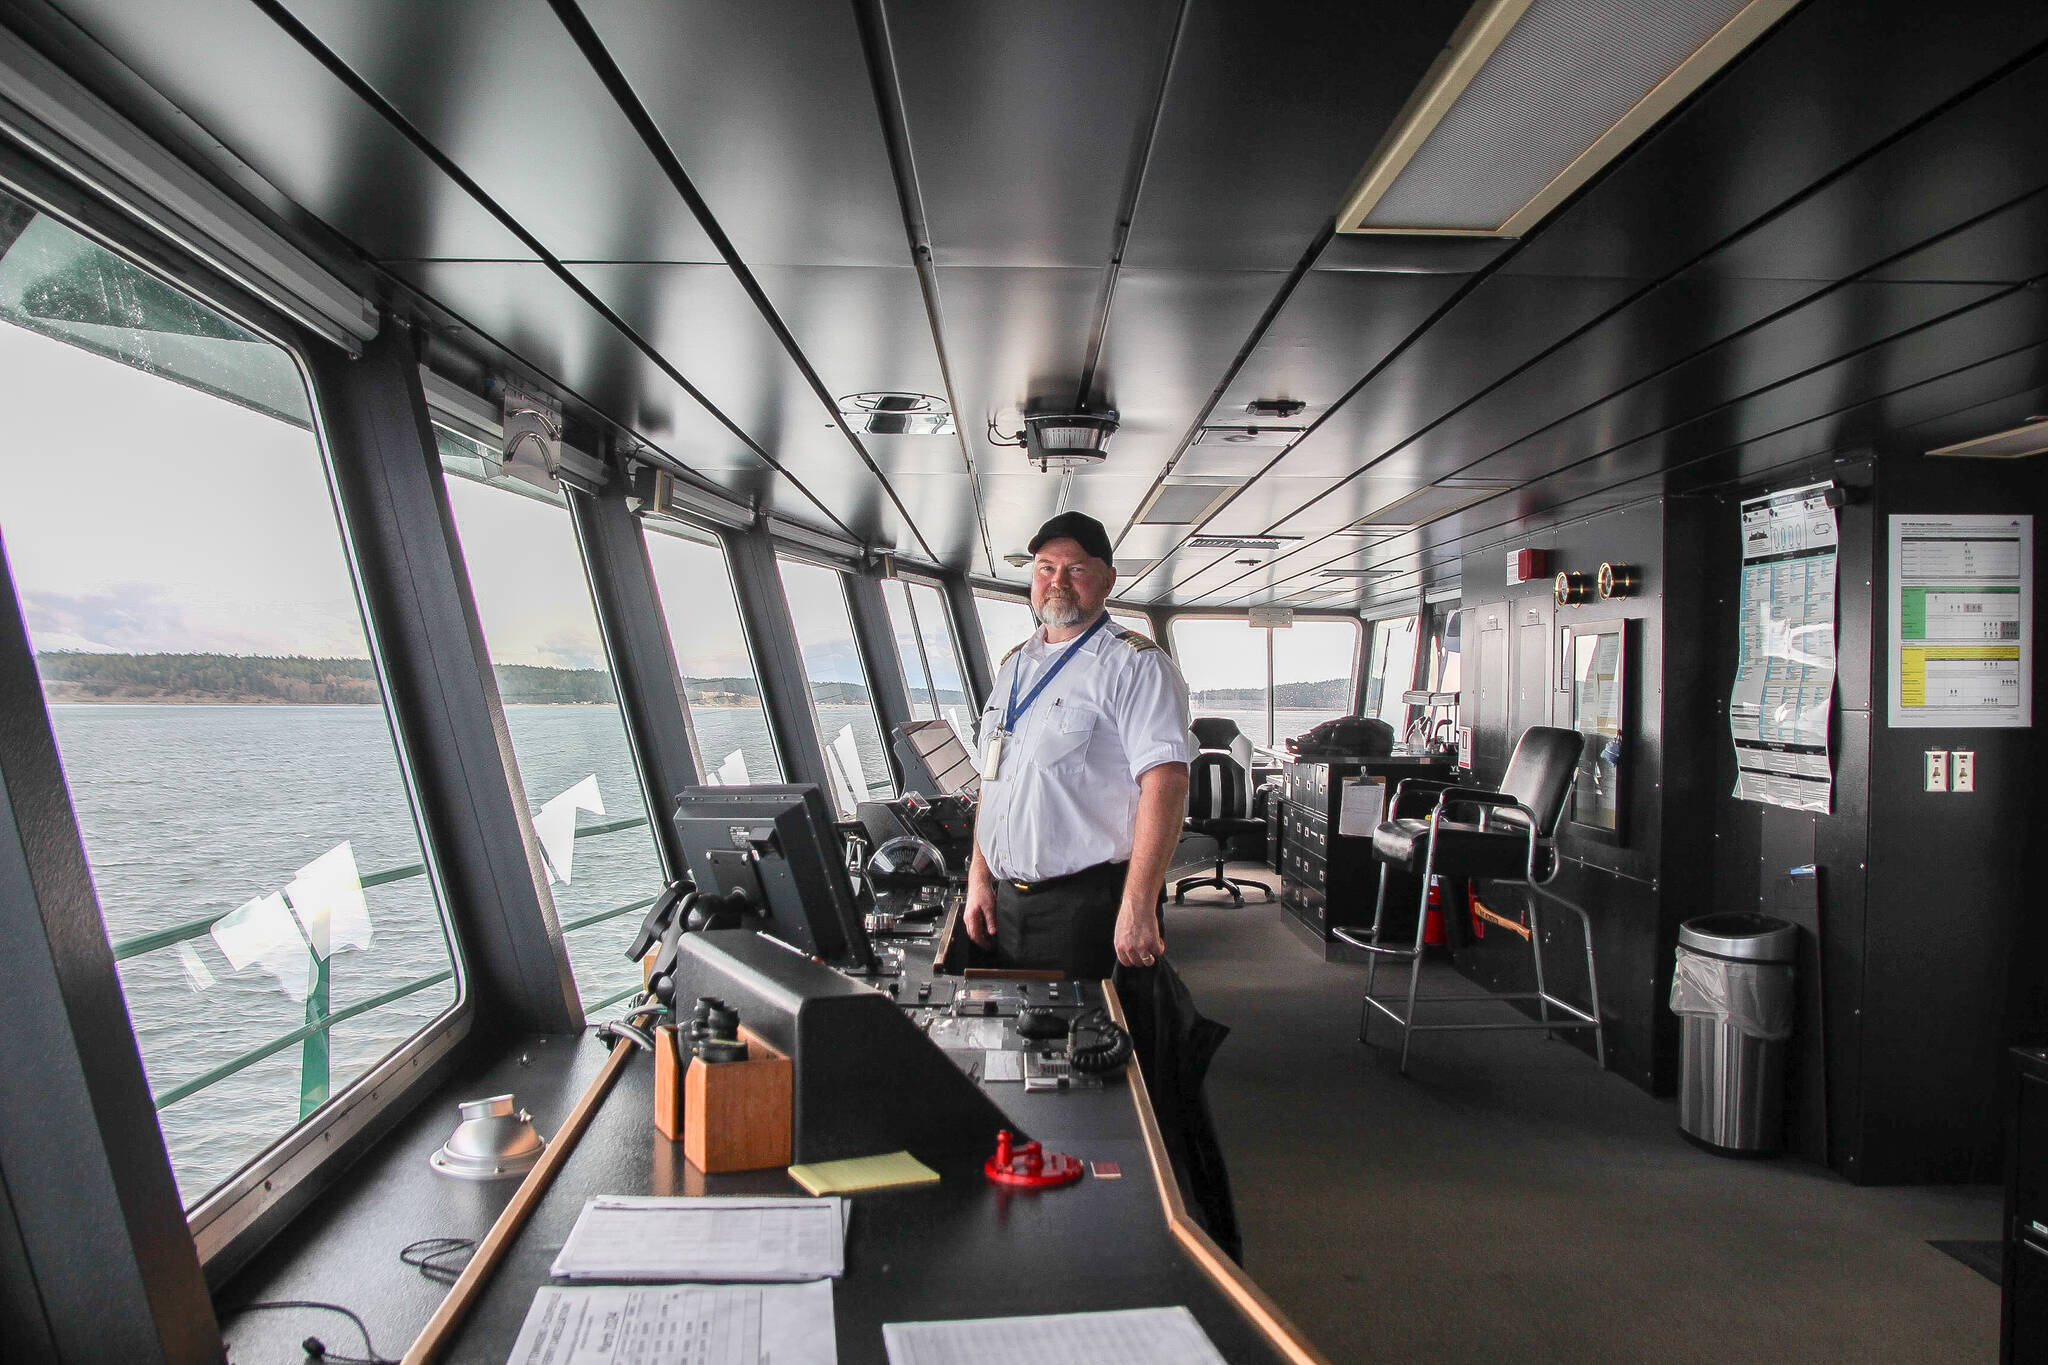 Captain Mark Gripp smiles surrounded by the displays and controls in the Kennewick’s pilothouse, moments before leaving Keystone Harbor. (Photo by Luisa Loi)